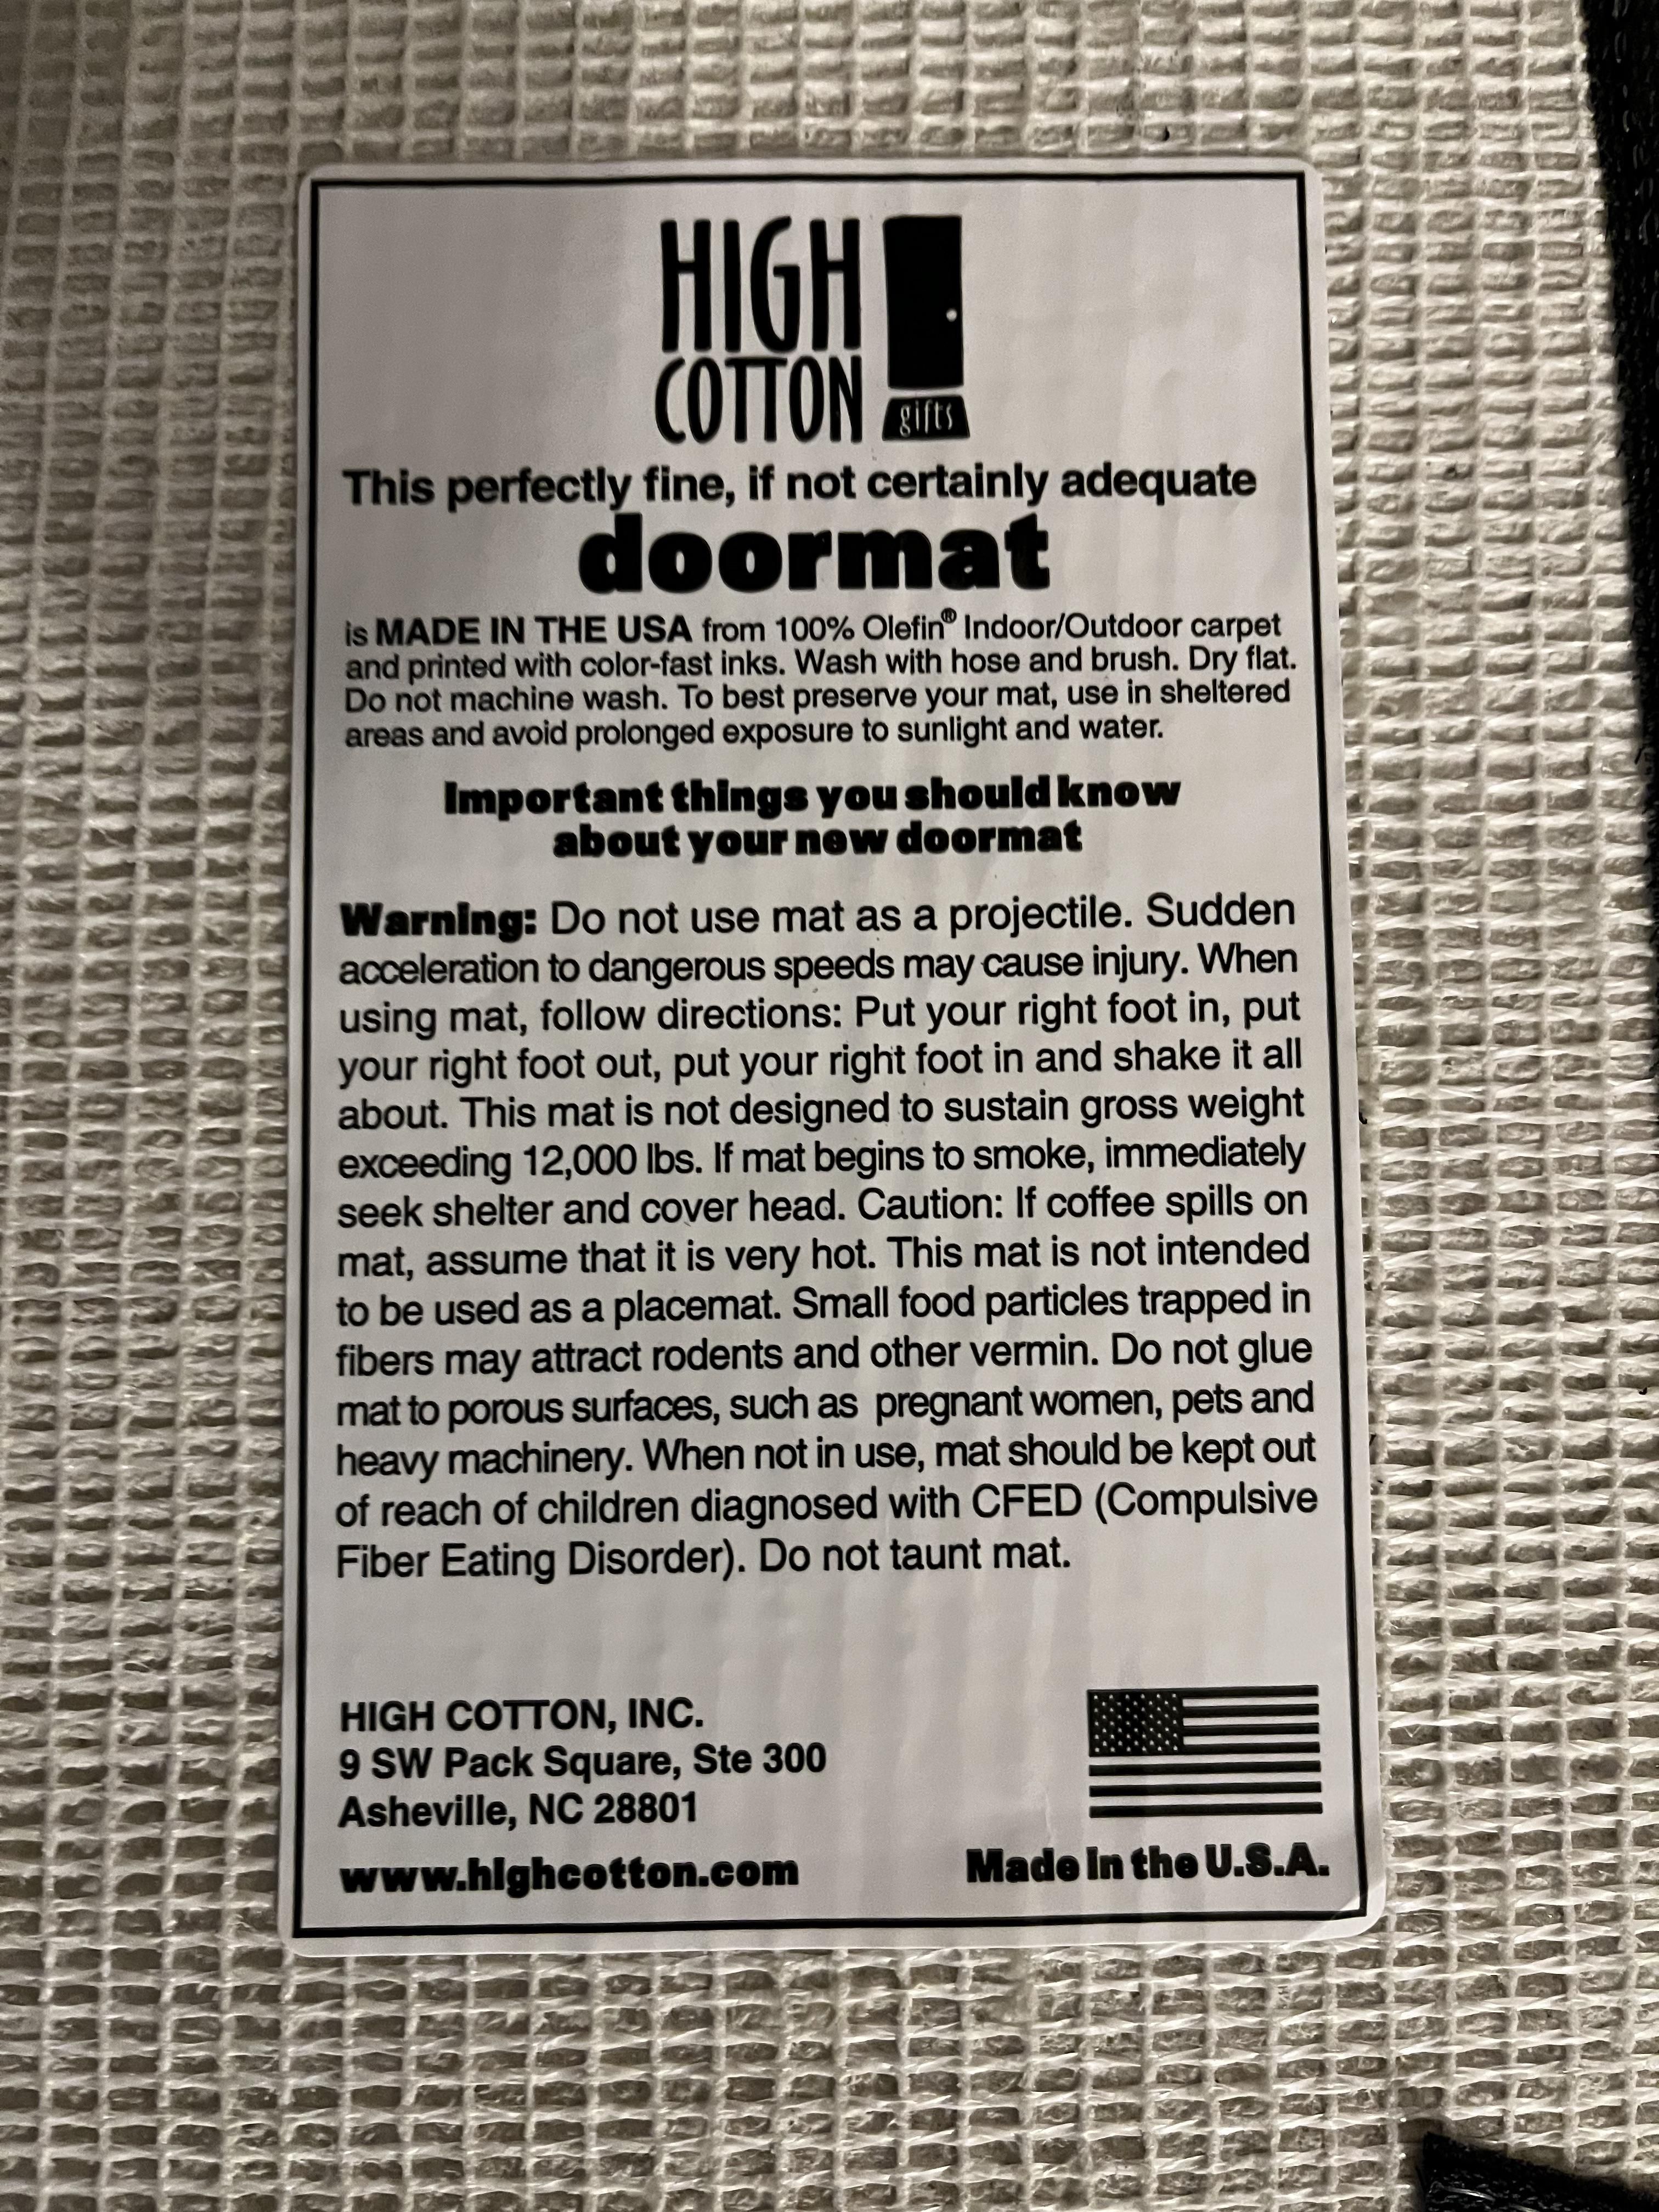 On the back of a floor mat I got for Christmas.